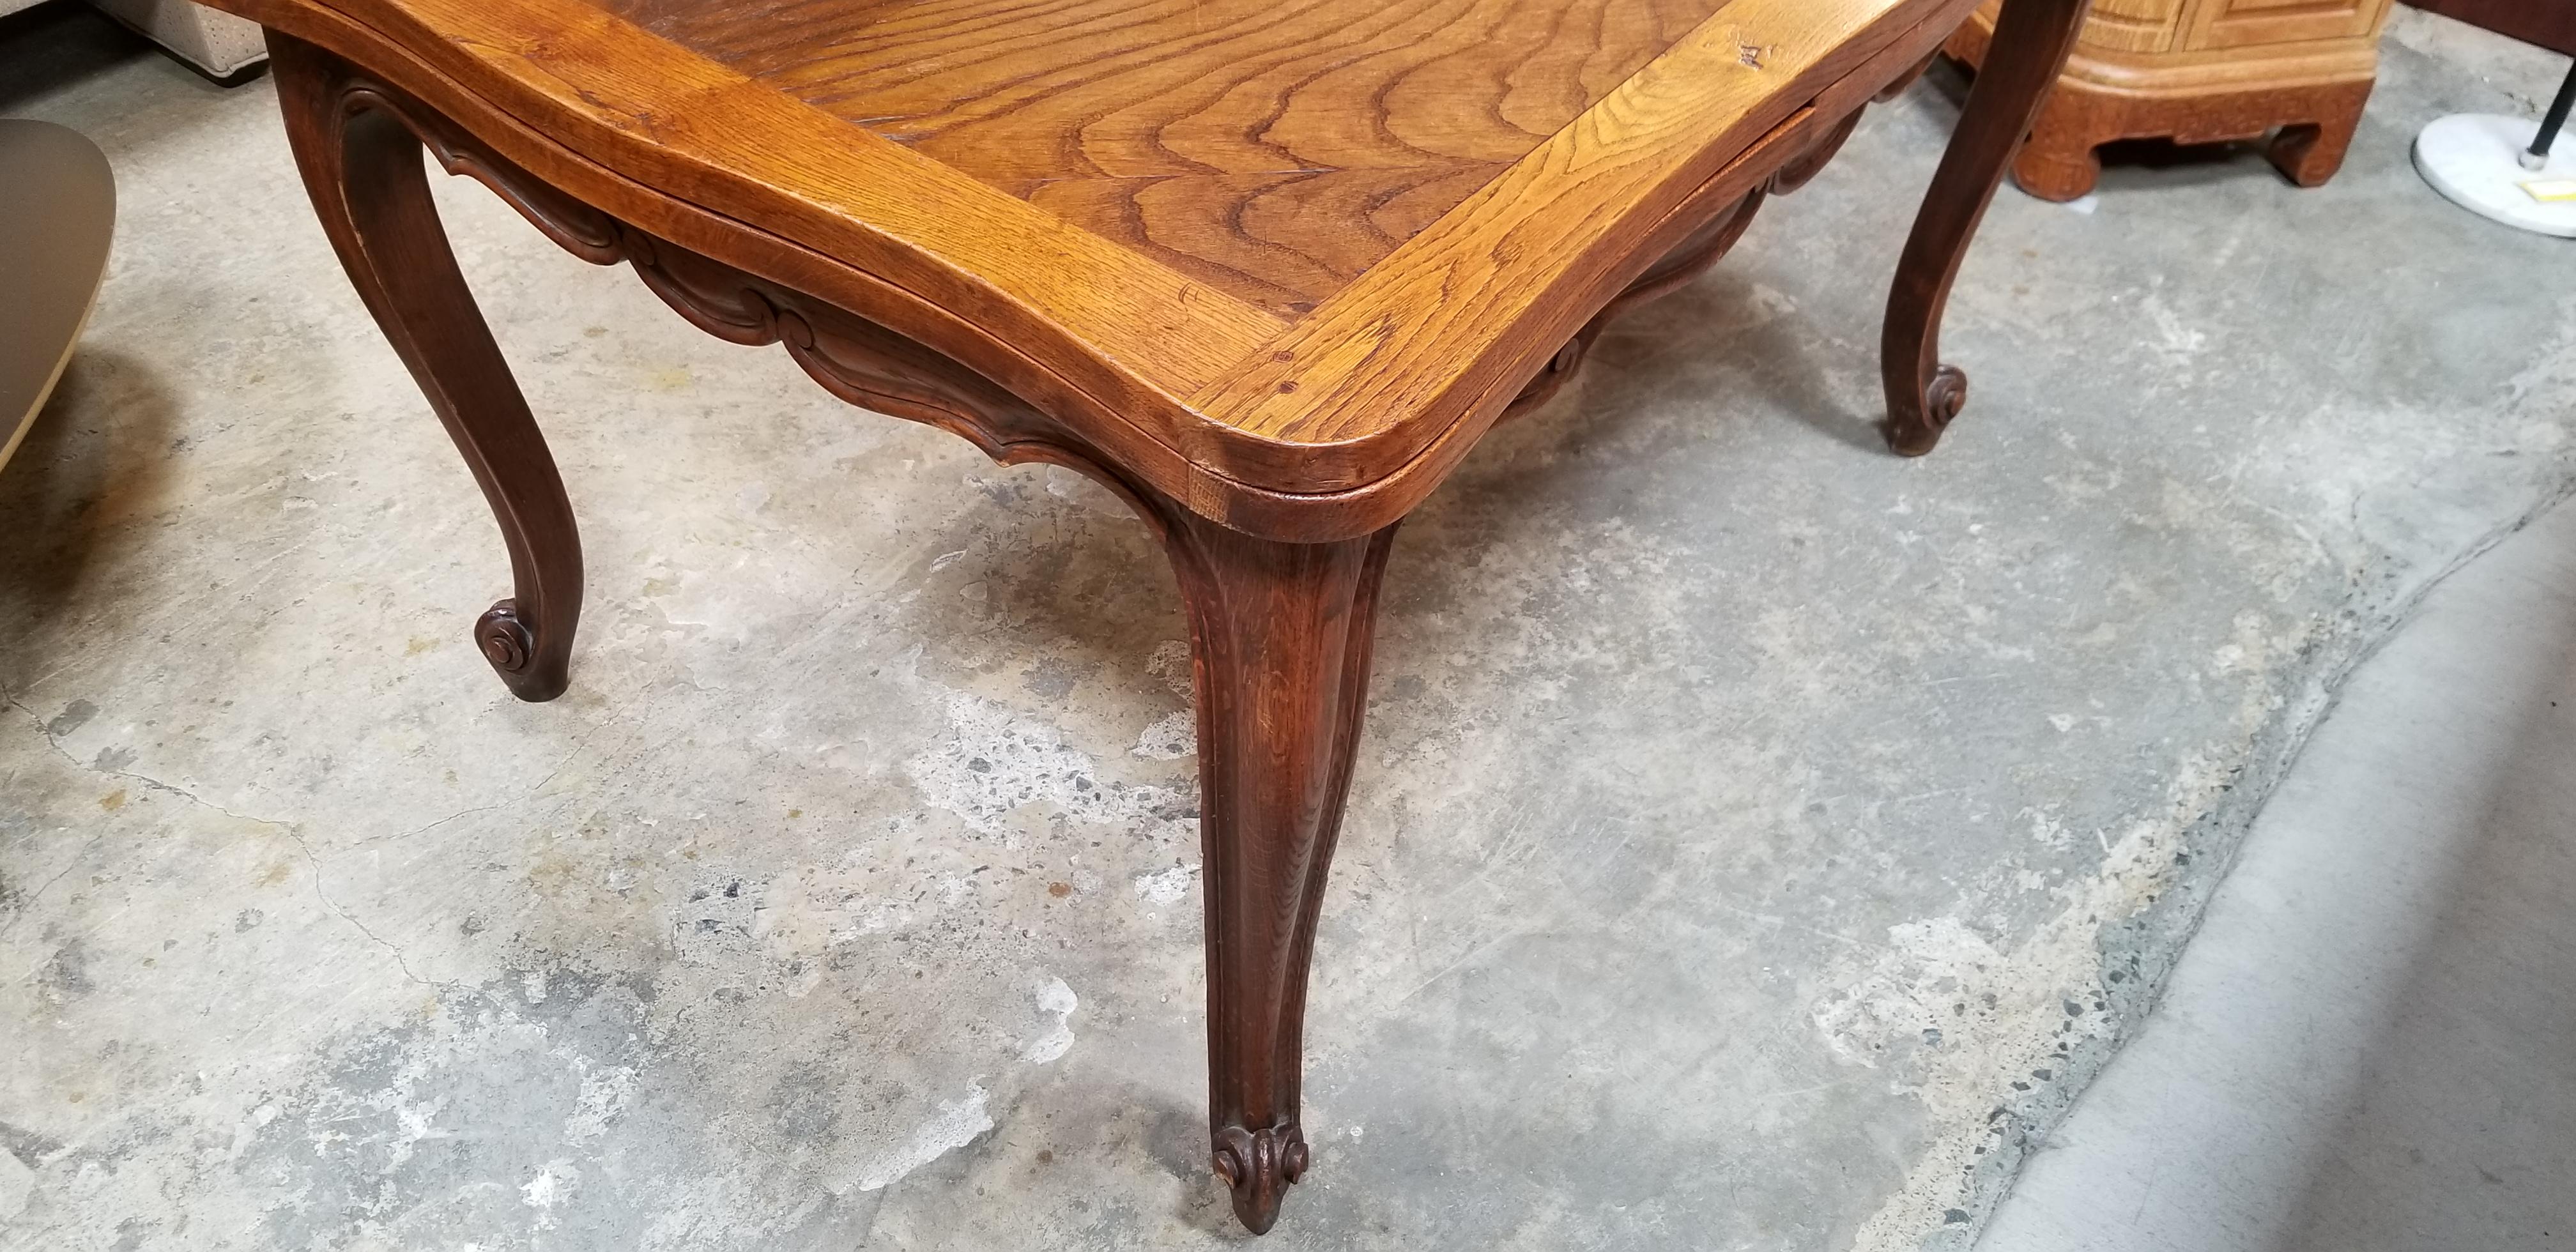 A Country French or French Provincial style expanding draw-leaf dining table with carved apron and carved cabriole legs. Parquetry top with matching design on table leaves. Deep, rich patina to original  finish with age appropriate wear.